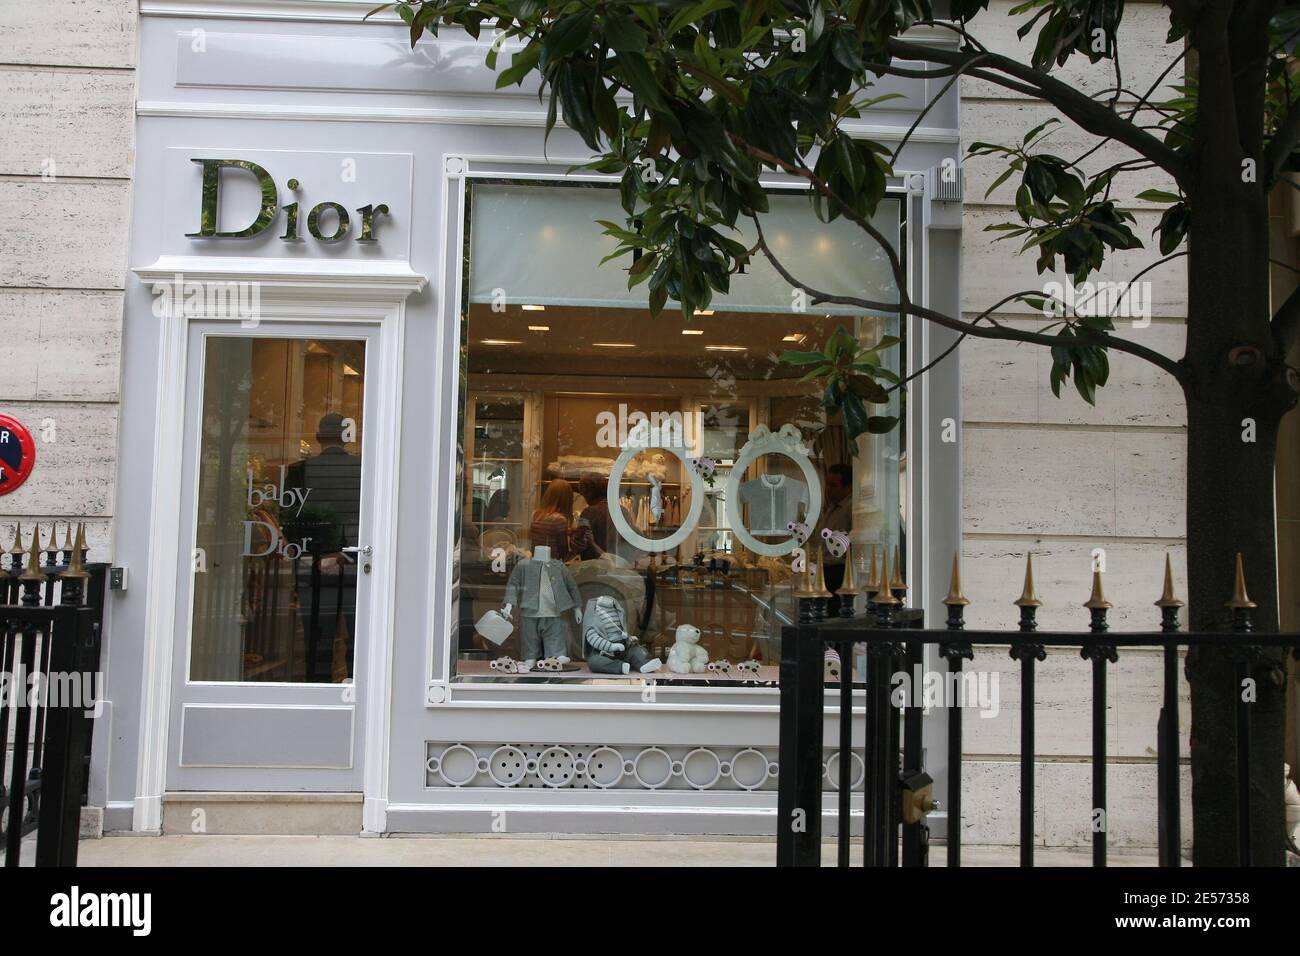 baby dior france